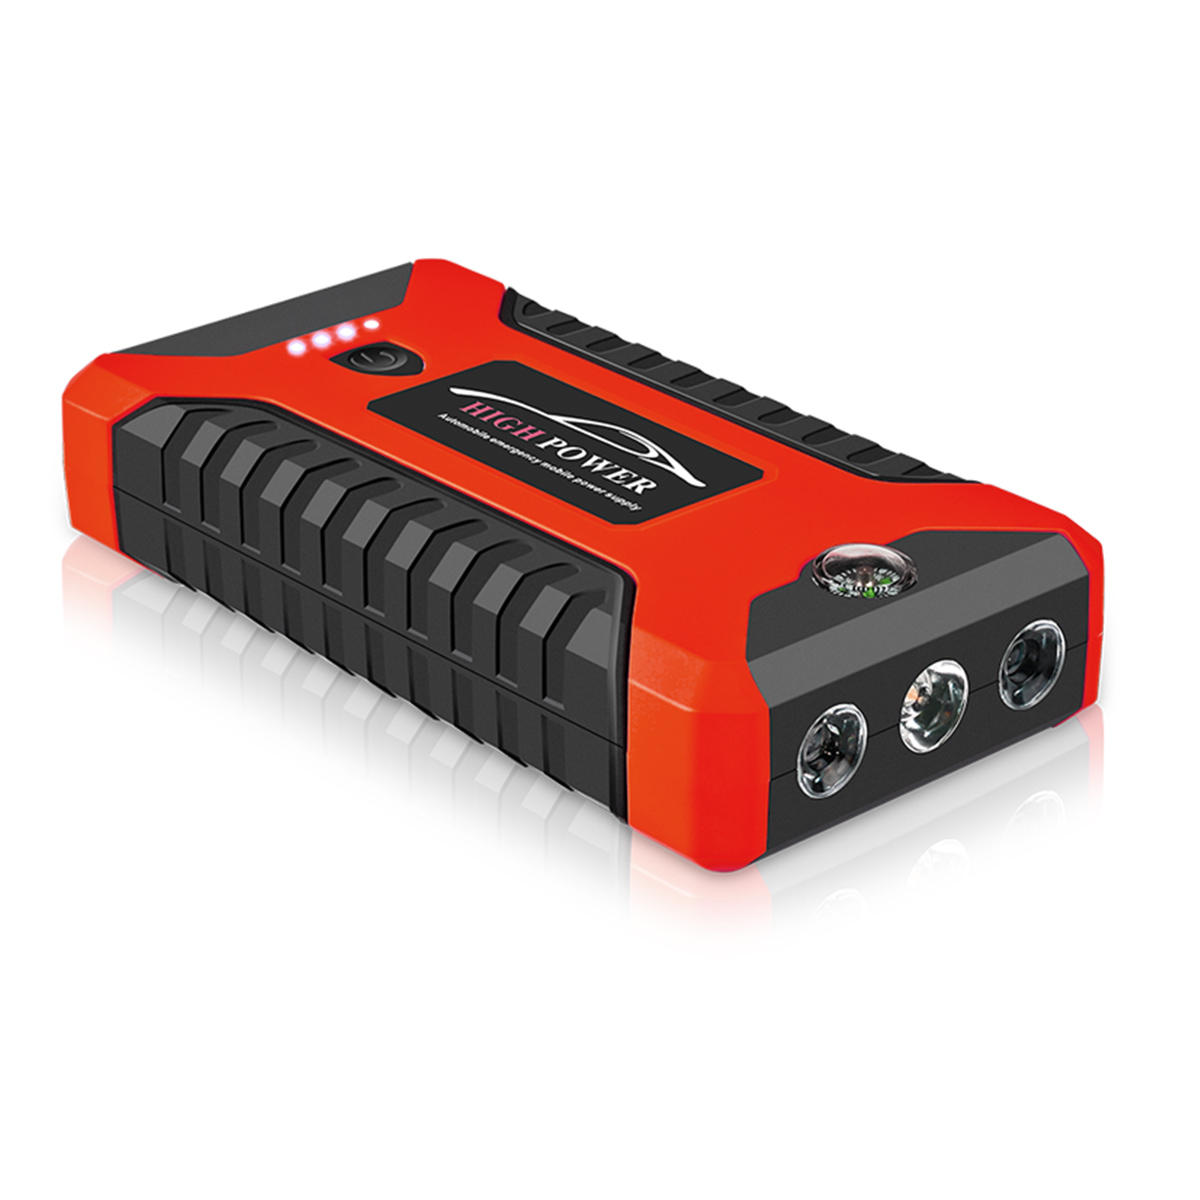 

98600mAh 12V Car Jump Starter Multifunction Auto Power Bank Portable 4USB Power Bank Emergency Battery Booster Clamp 600